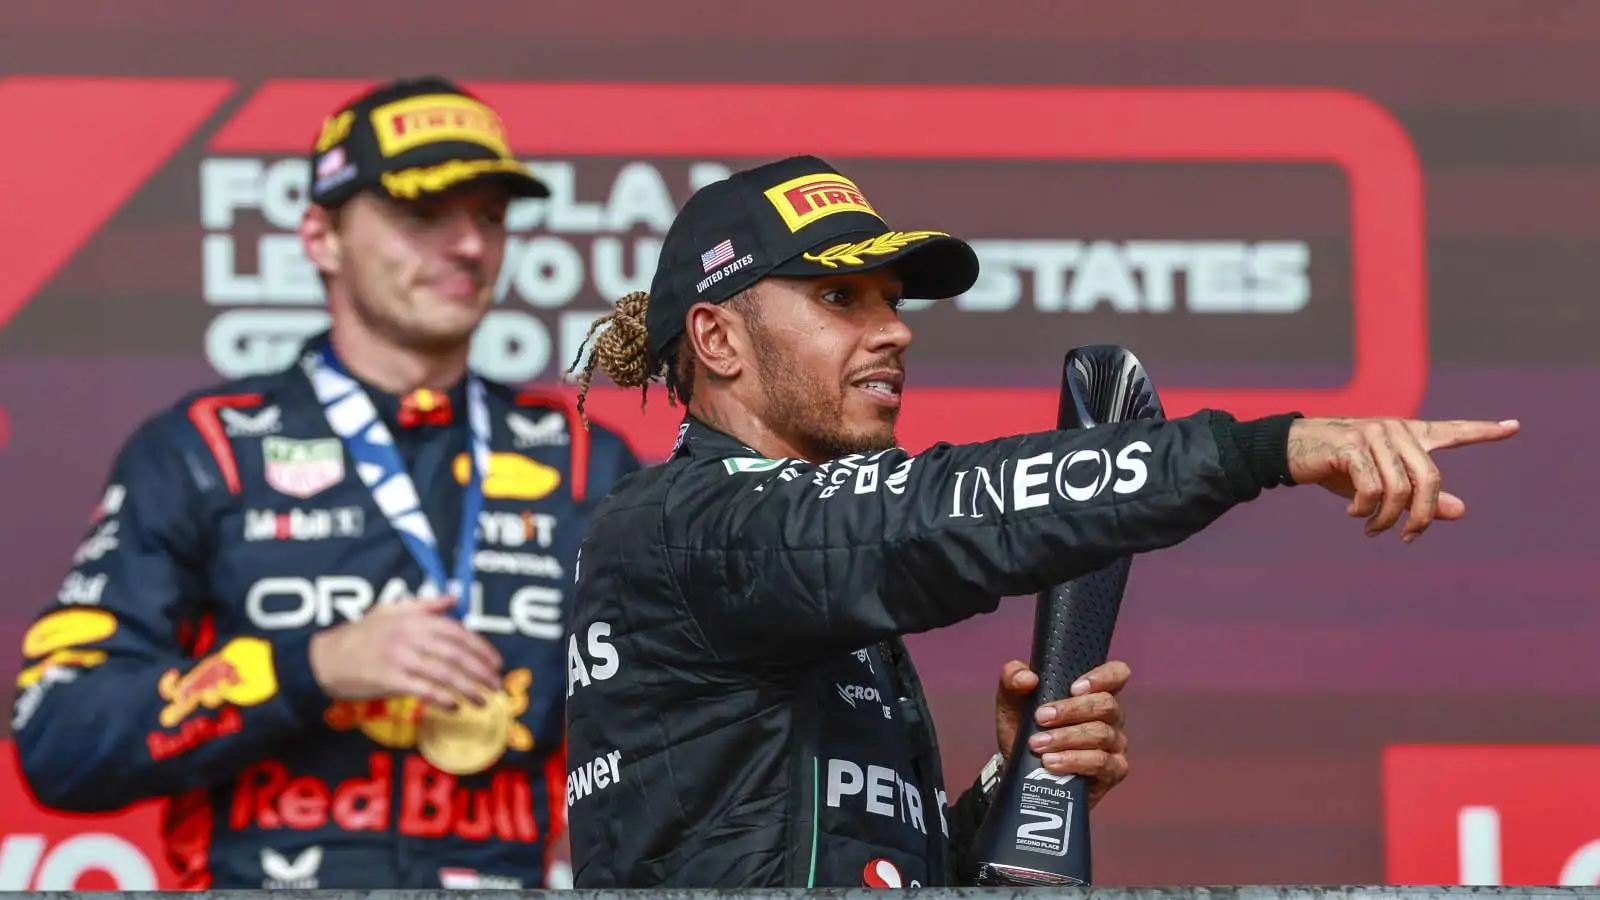 Lewis Hamilton in front of Max Verstappen on the podium.